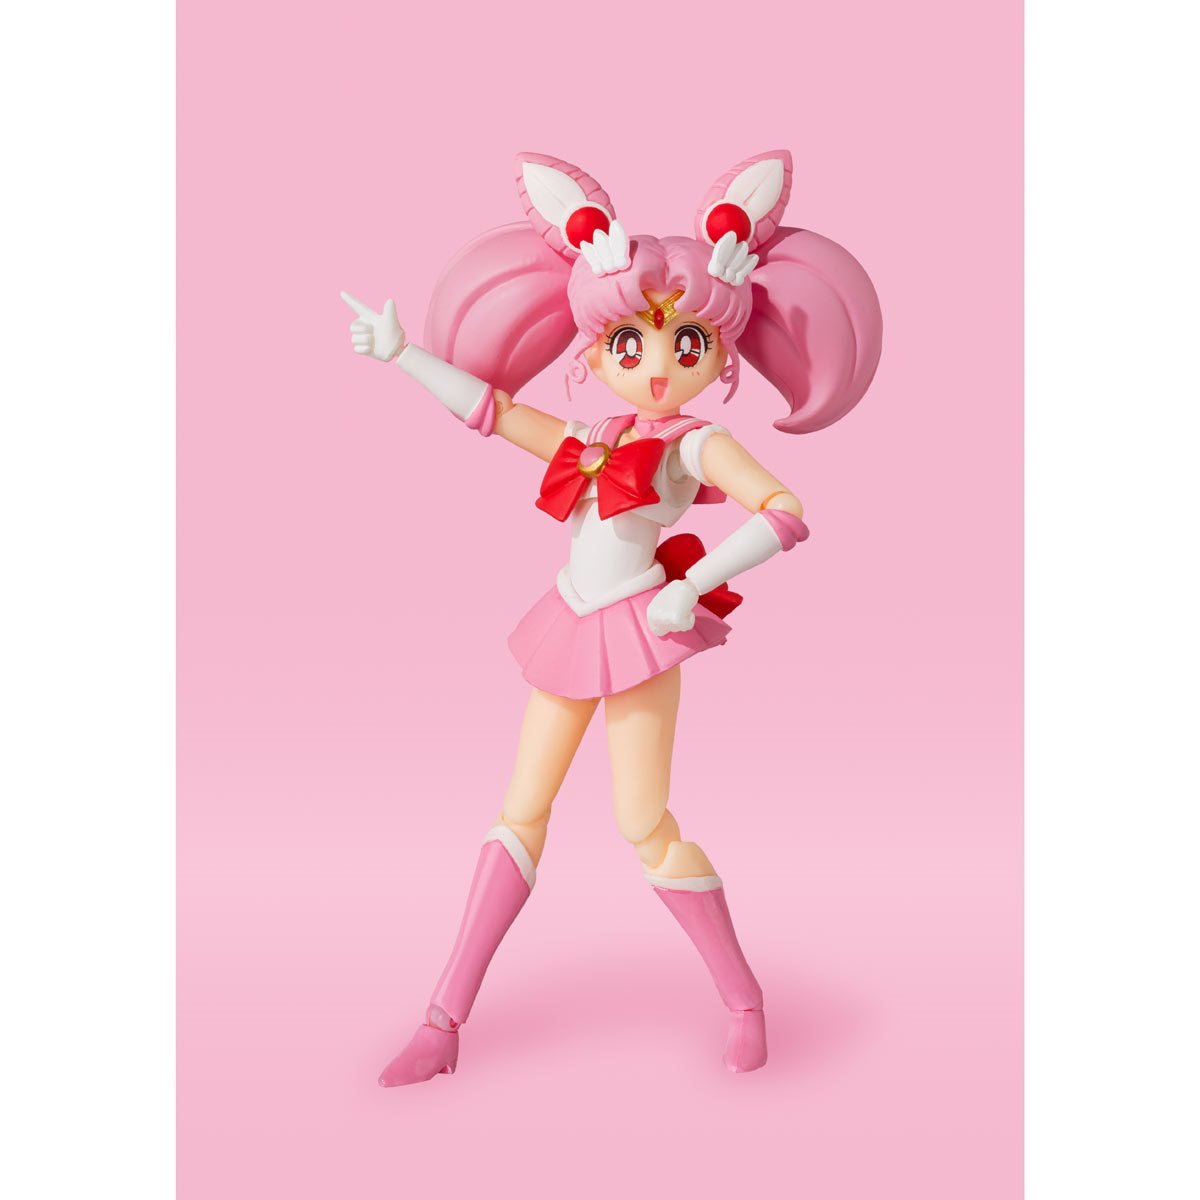 
                  
                    Sailor Chibi Moon Animation Color Edition SH Figuarts Action Figure - A 3.9-inch (10cm) tall articulated figure of Chibi Moon from the Sailor Moon series. Includes face plates, replacement wrists, alternate bangs, pink moon stick, and pedestals.
                  
                